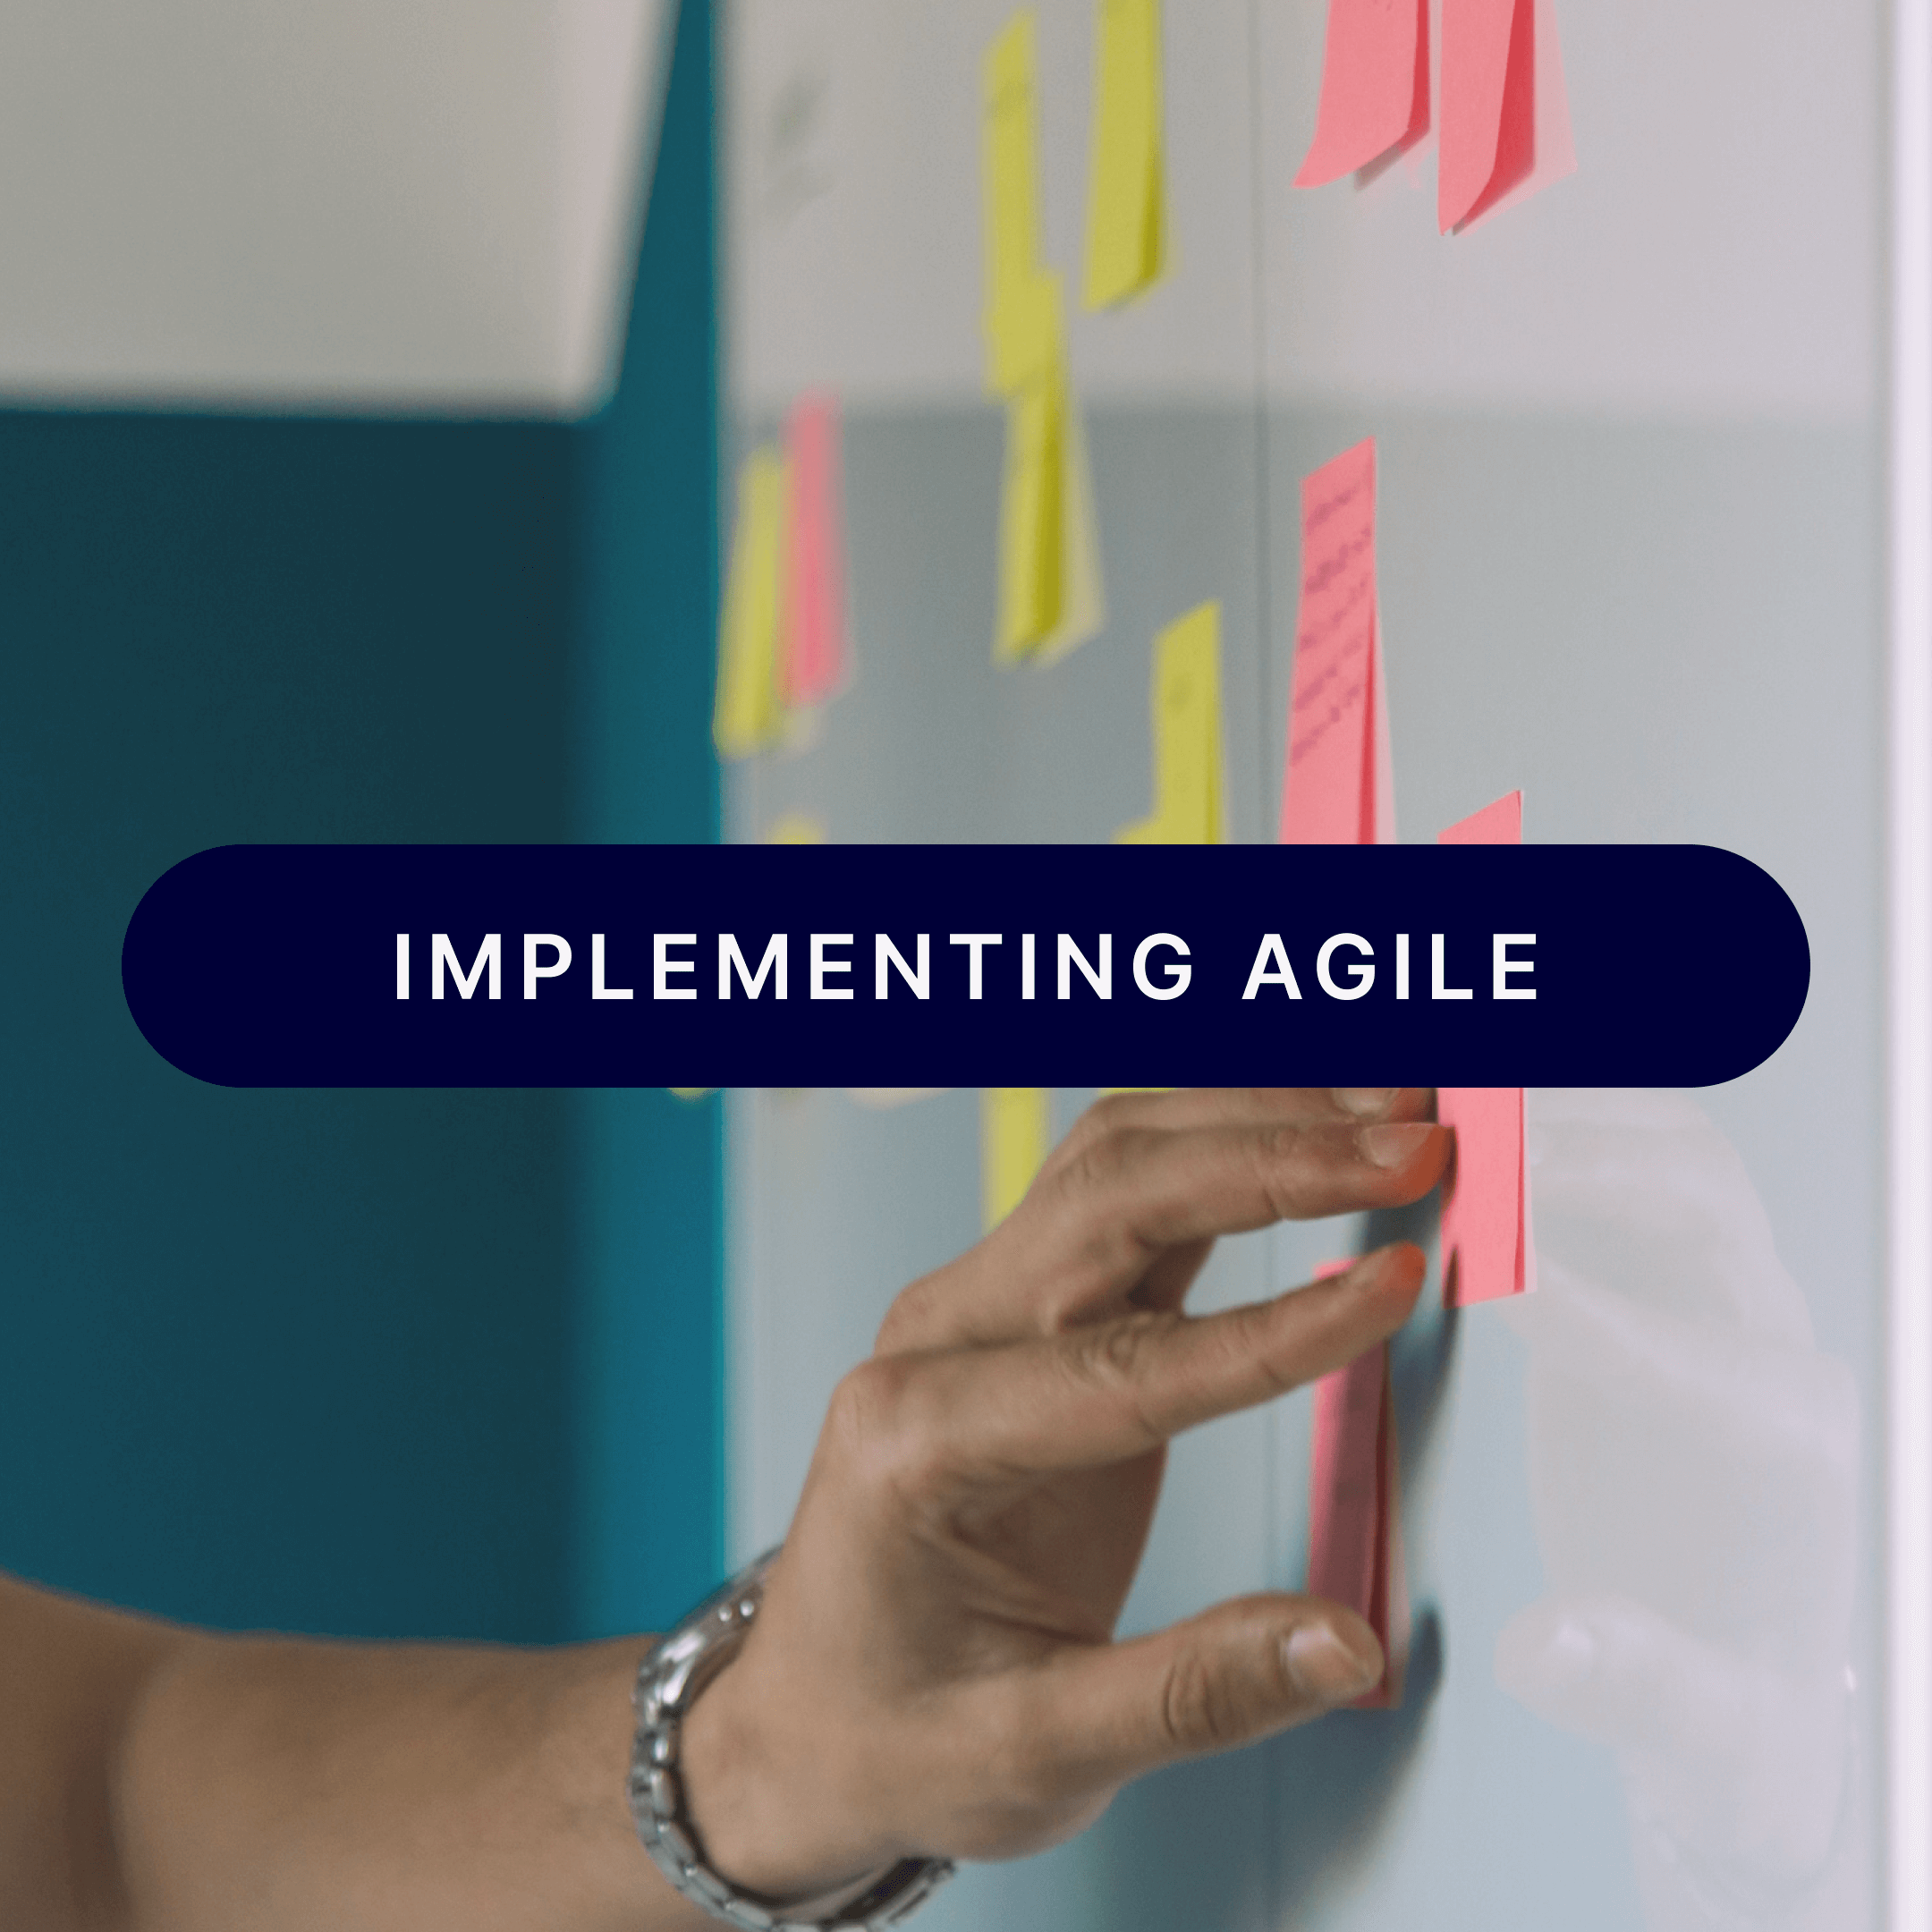 9 reasons to implement agile methodologies in a company